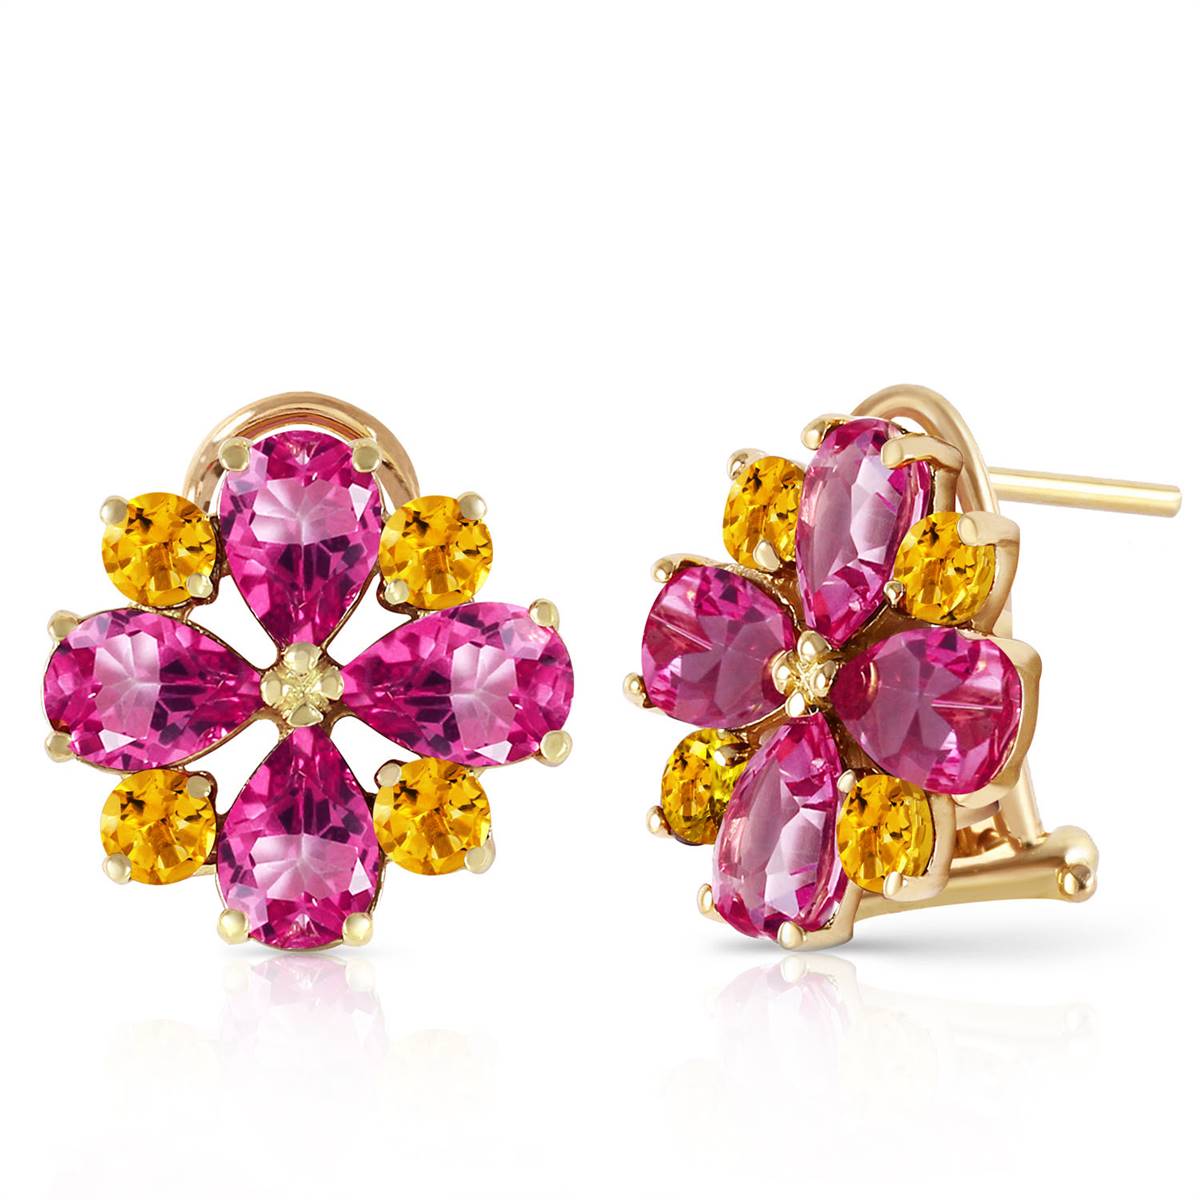 4.85 Carat 14K Solid Yellow Gold French Clips Earrings Pink Topaz Citrine